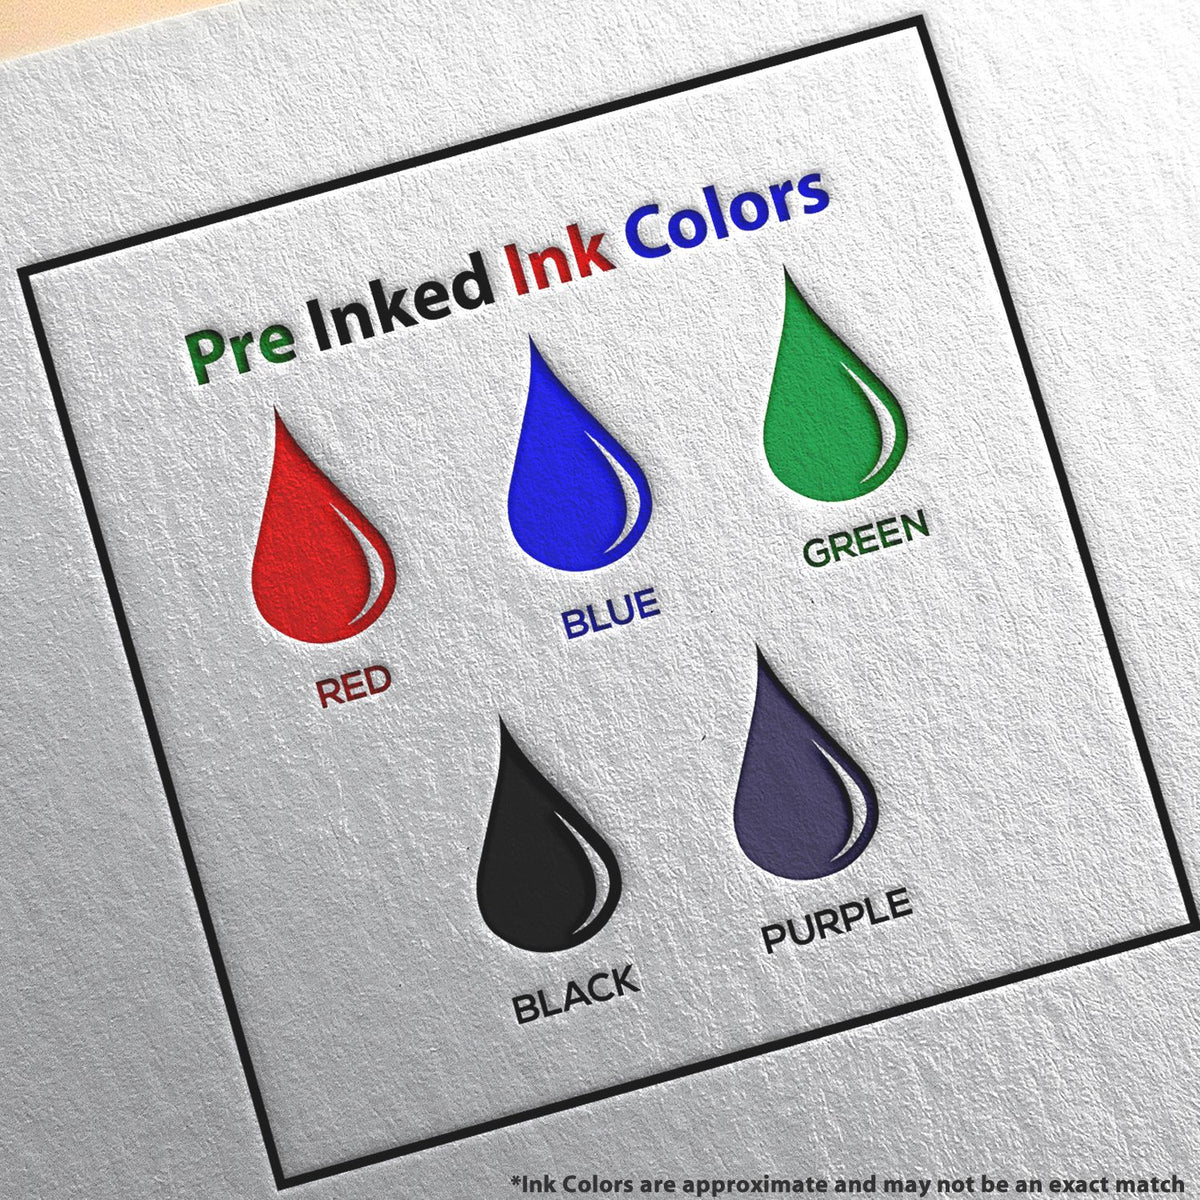 A picture showing the different ink colors or hues available for the Premium MaxLight Pre-Inked Minnesota Engineering Stamp product.